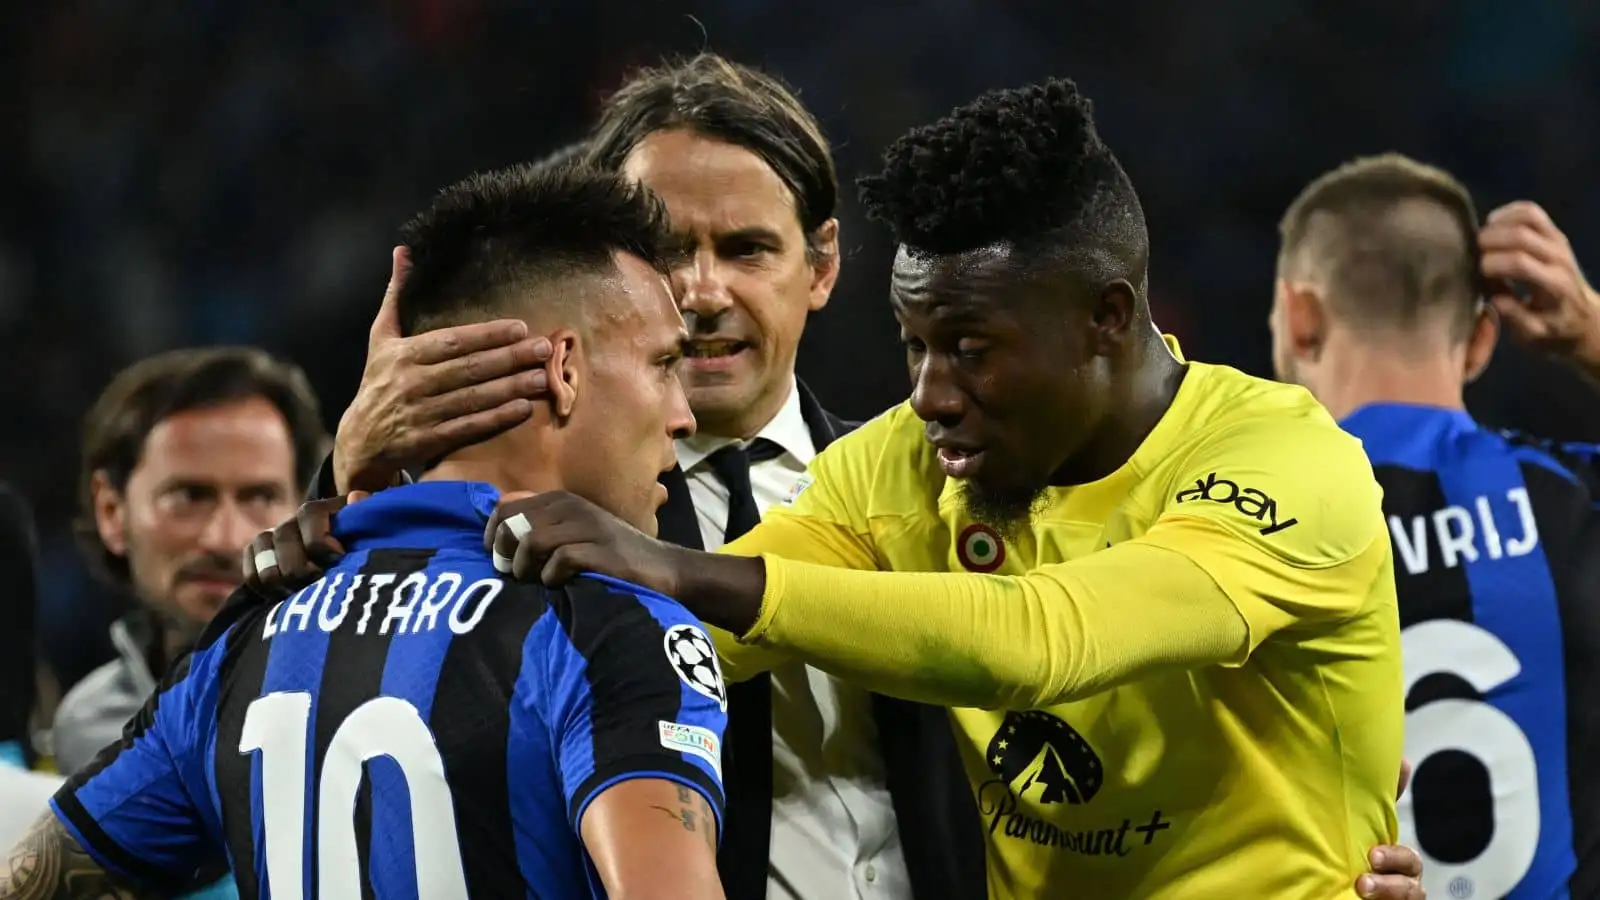 Lautaro Martinez (Inter) Andre Onana (Inter) Simone Inzaghi Coach (Inter) during the UEFA Champions League Final match between Manchester City 1-0 Inter at Ataturk Olympic Stadium on June 10, 2023 in Istanbul